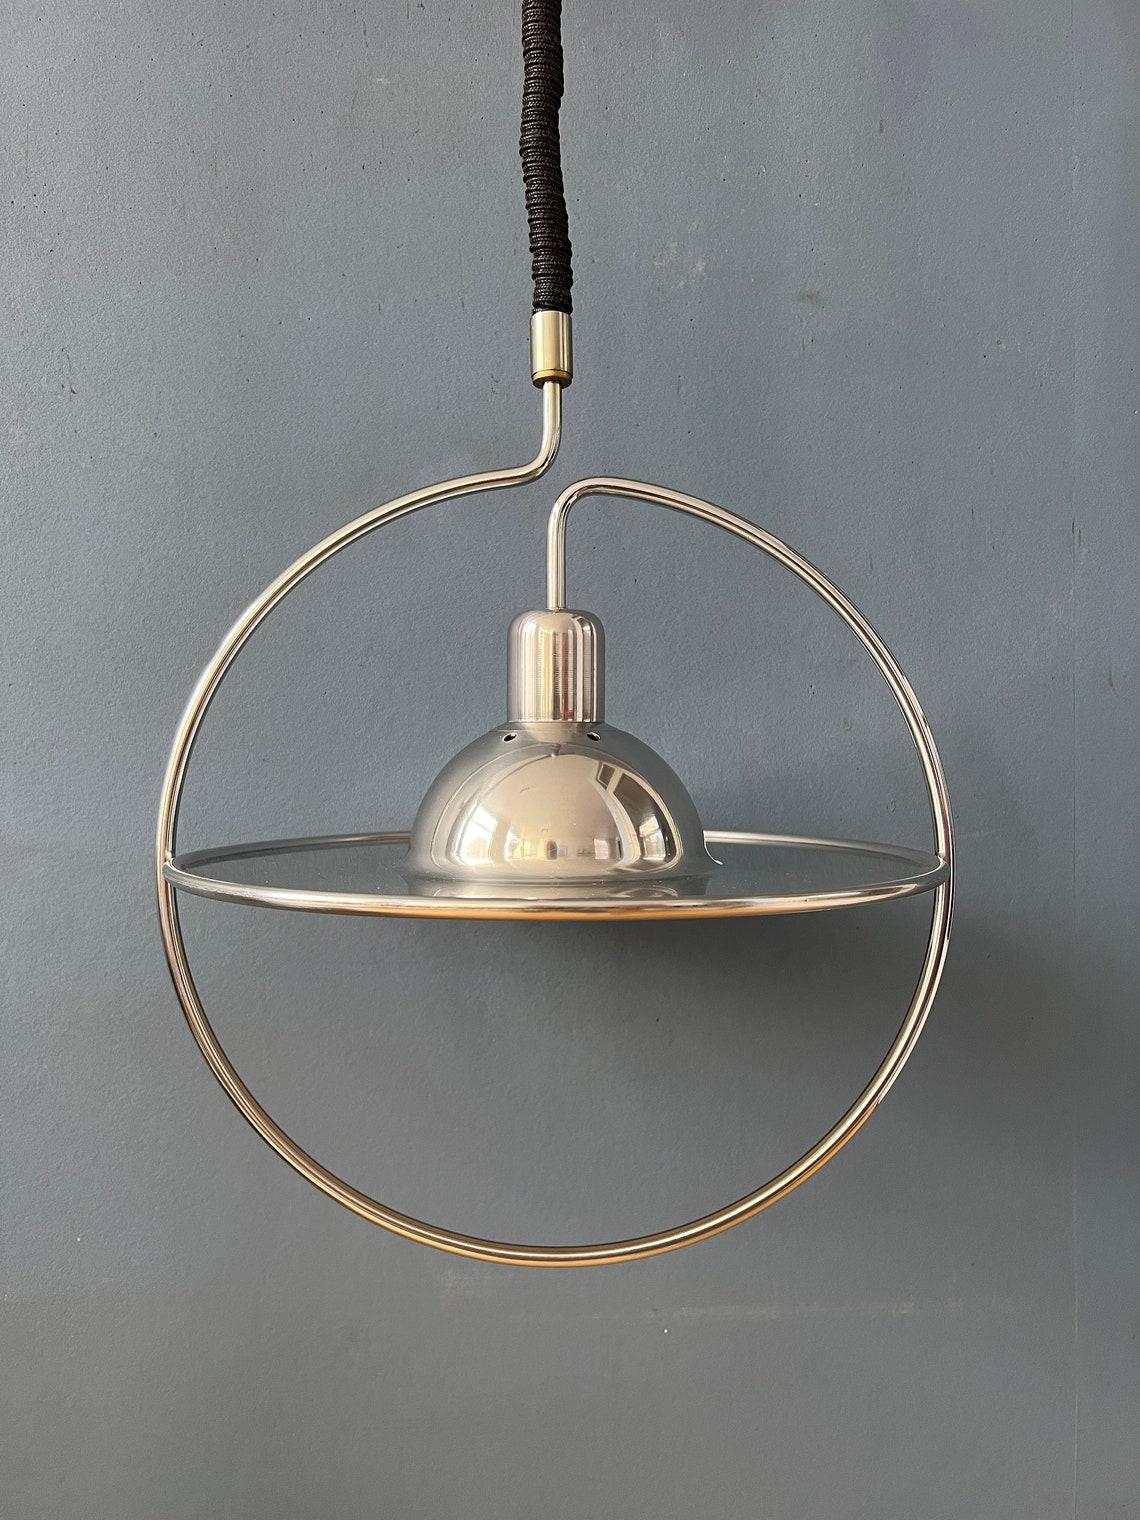 Mid Century UFO Pendant Lamp with Decorative Chrome Frame, 1970s For Sale 2